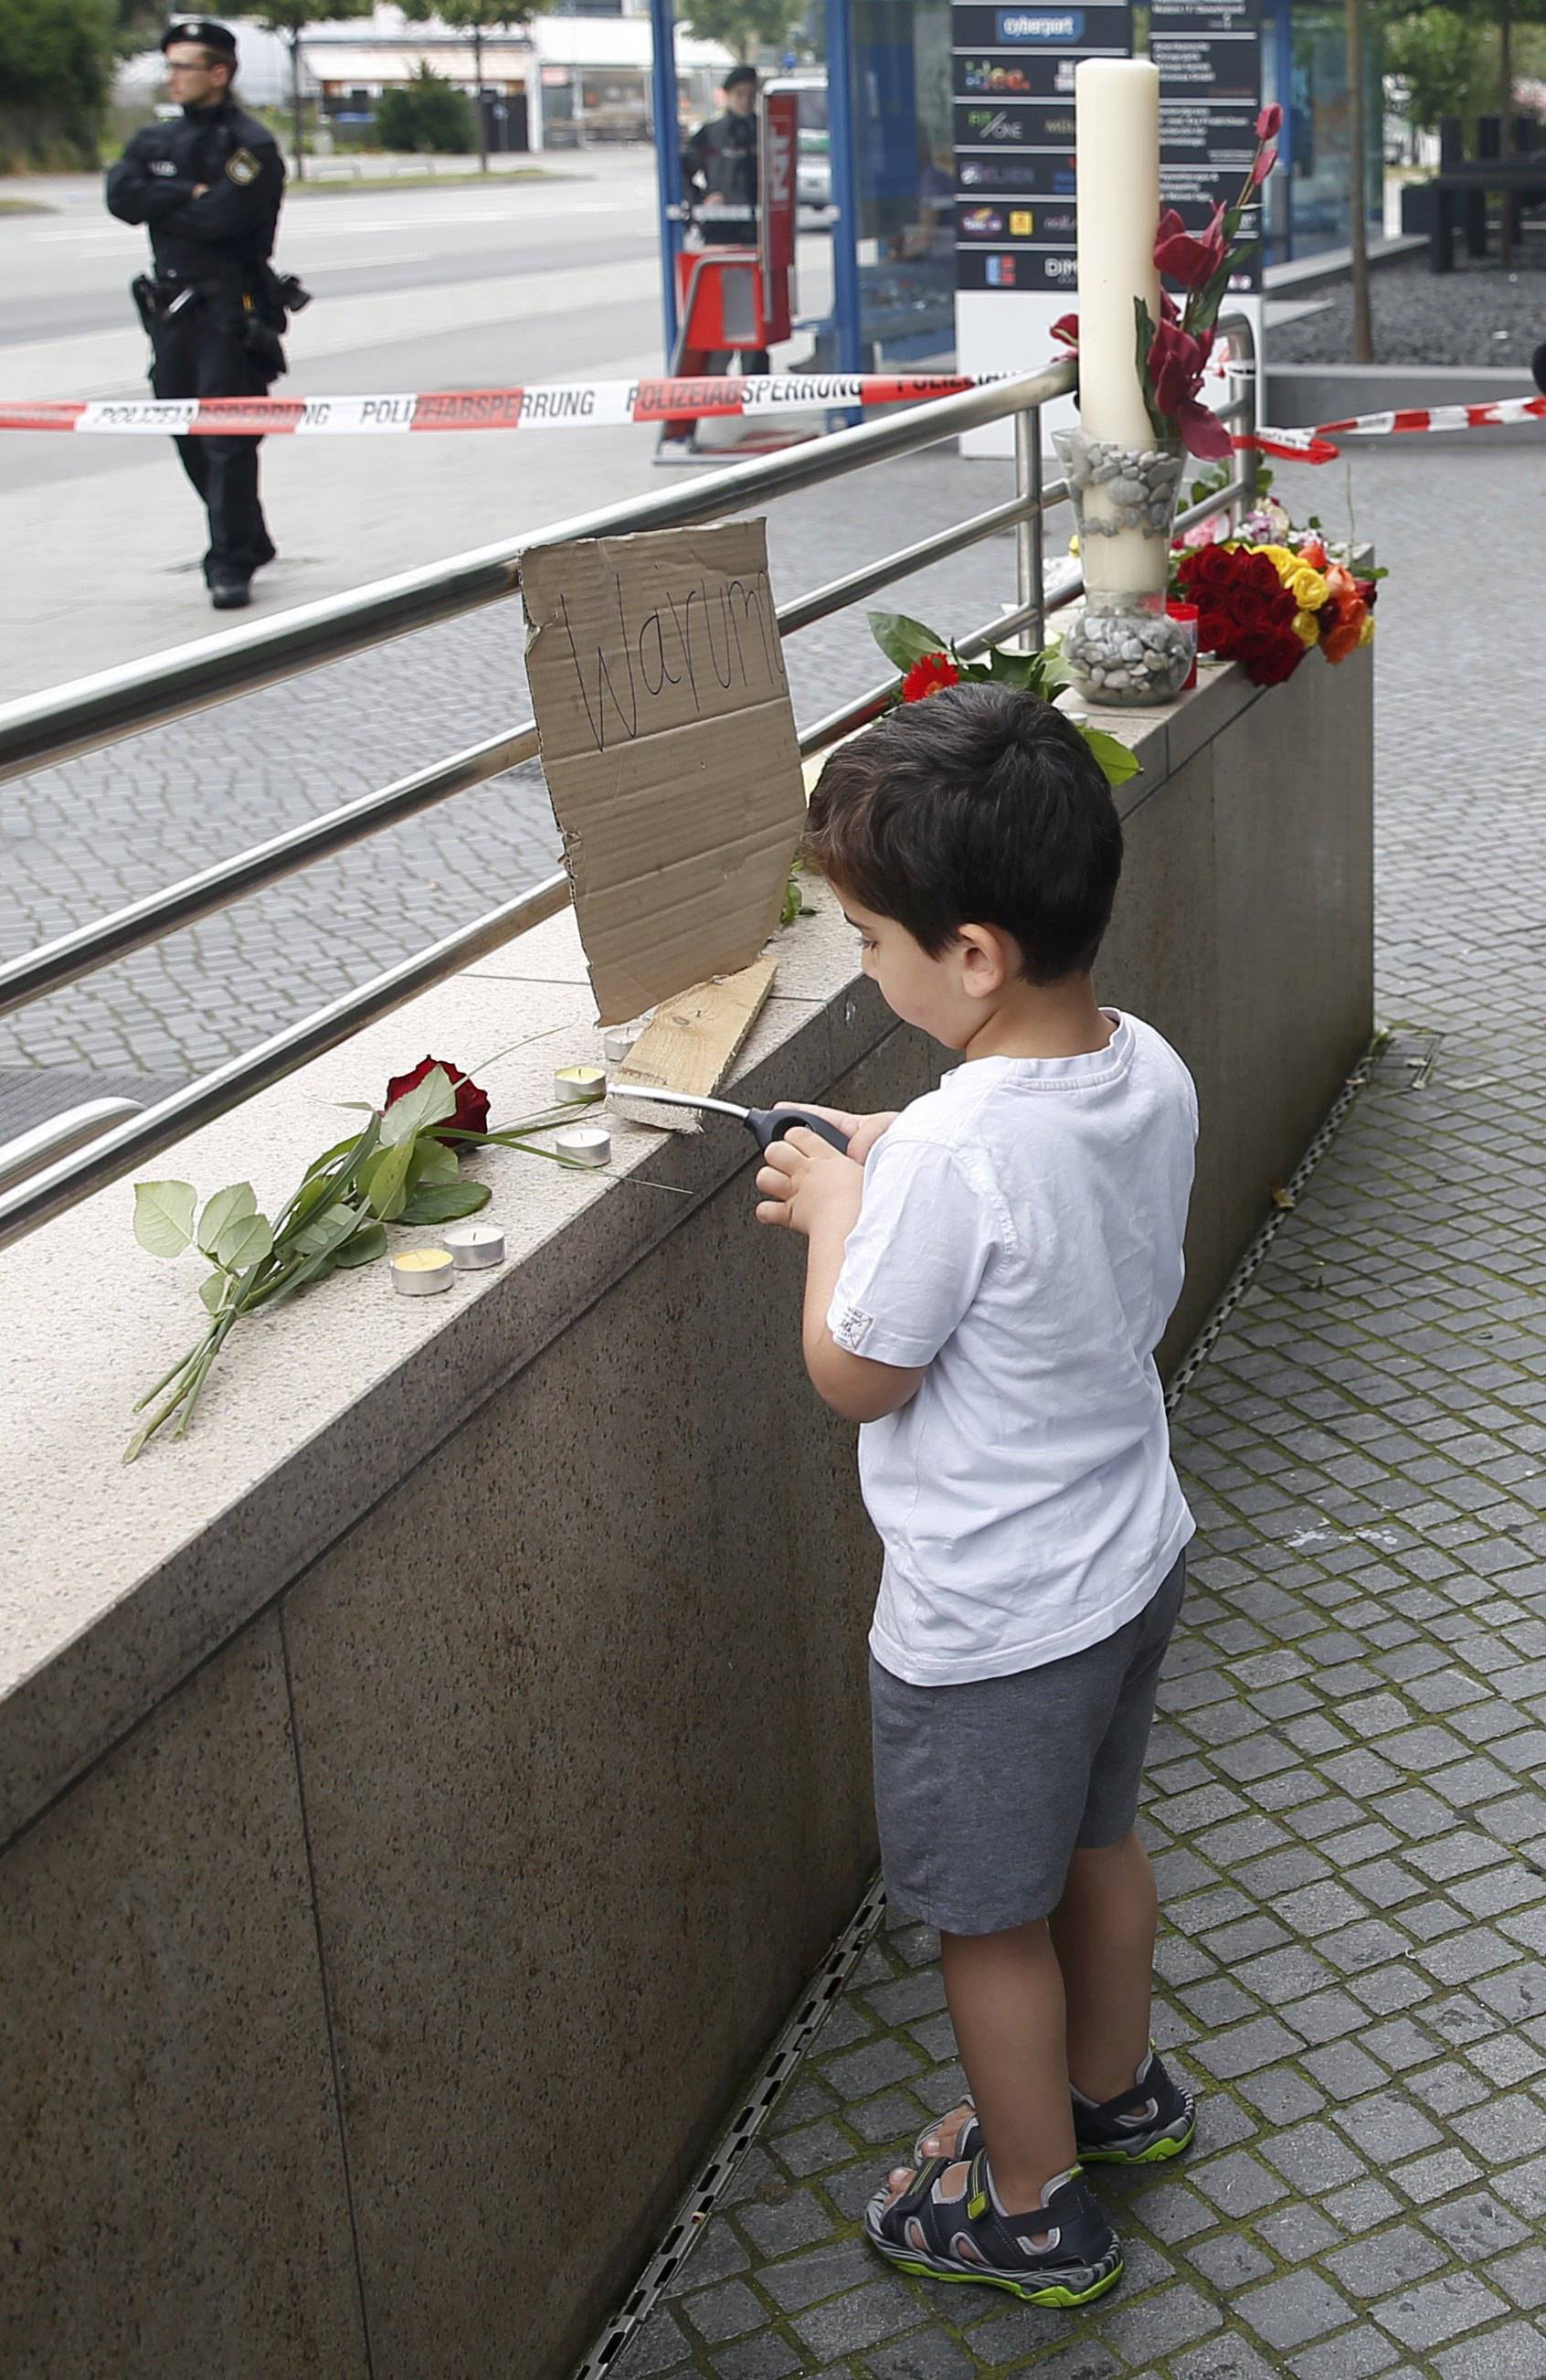 A young boy lights candles on wall near Olympia shopping mall in Munich